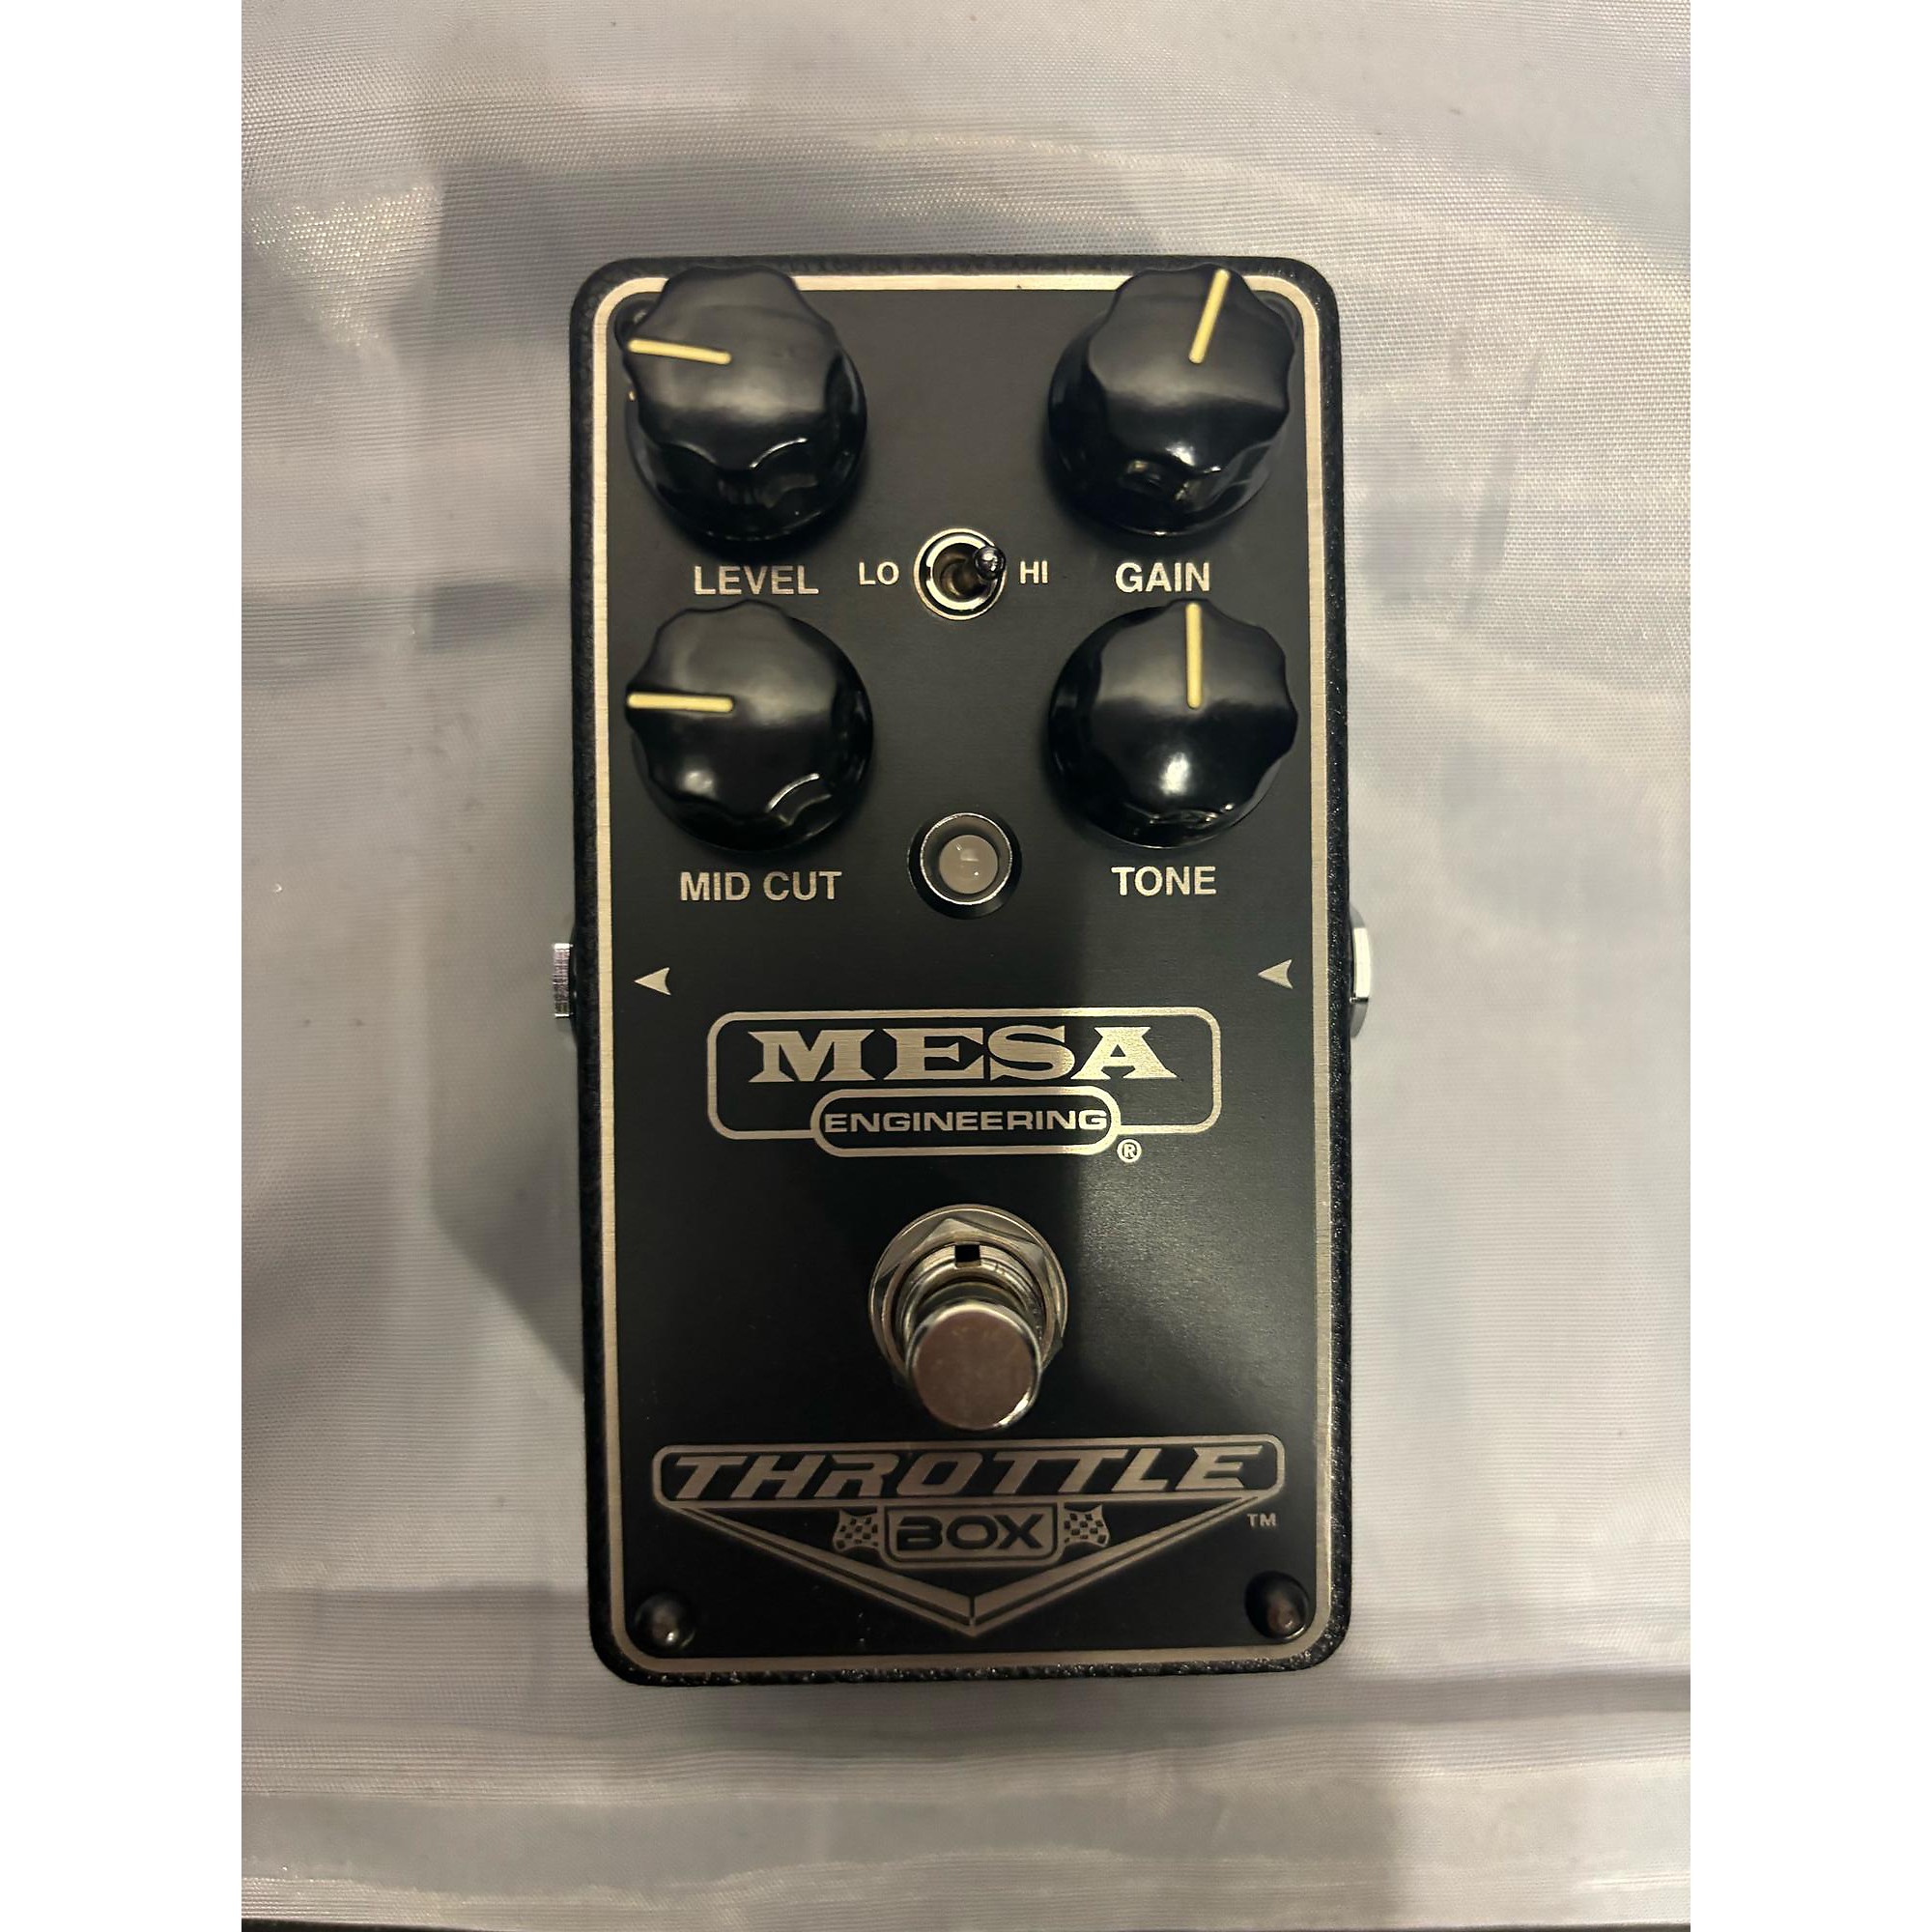 Used MESA/Boogie Throttle Box Effect Pedal | Guitar Center